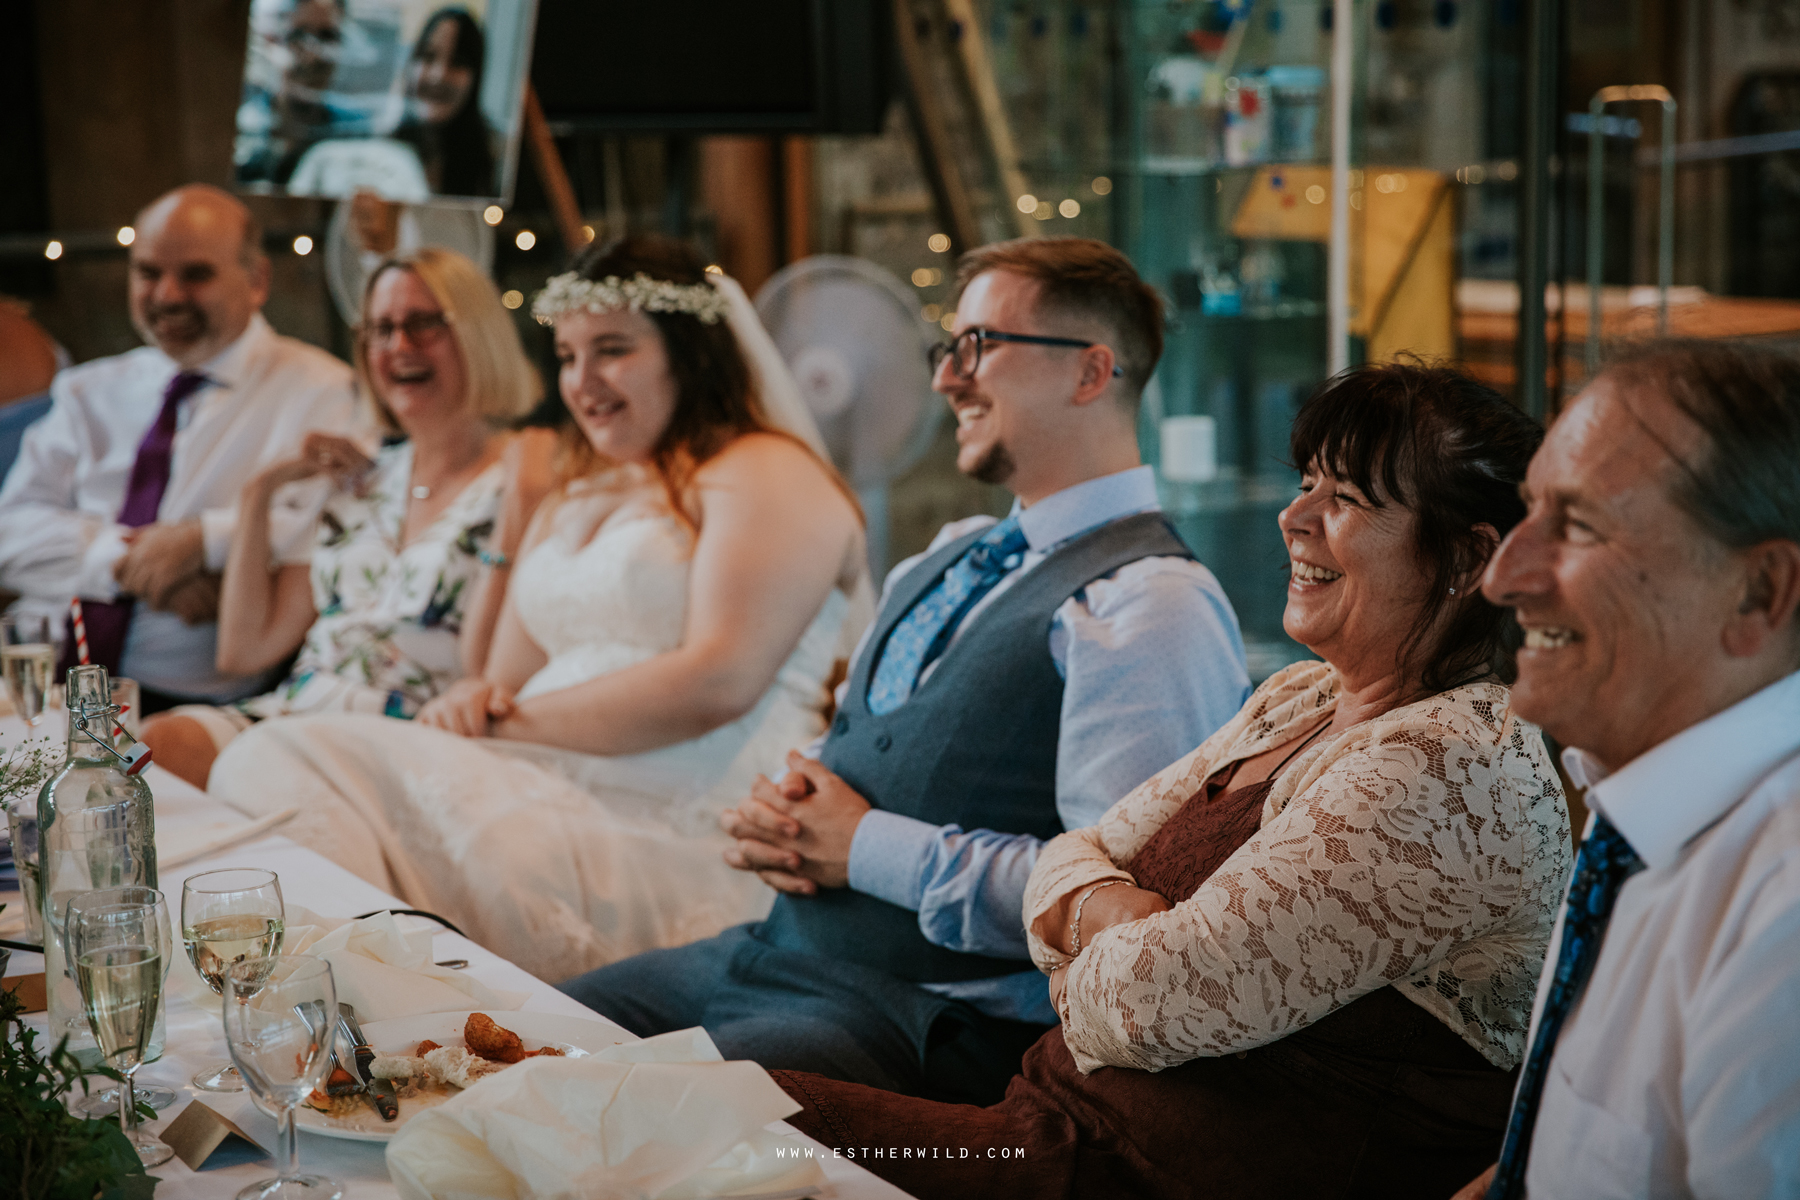 Norwich_Castle_Arcade_Grosvenor_Chip_Birdcage_Cathedral_Cloisters_Refectory_Wedding_Photography_Esther_Wild_Photographer_Norfolk_Kings_Lynn_3R8A2877.jpg